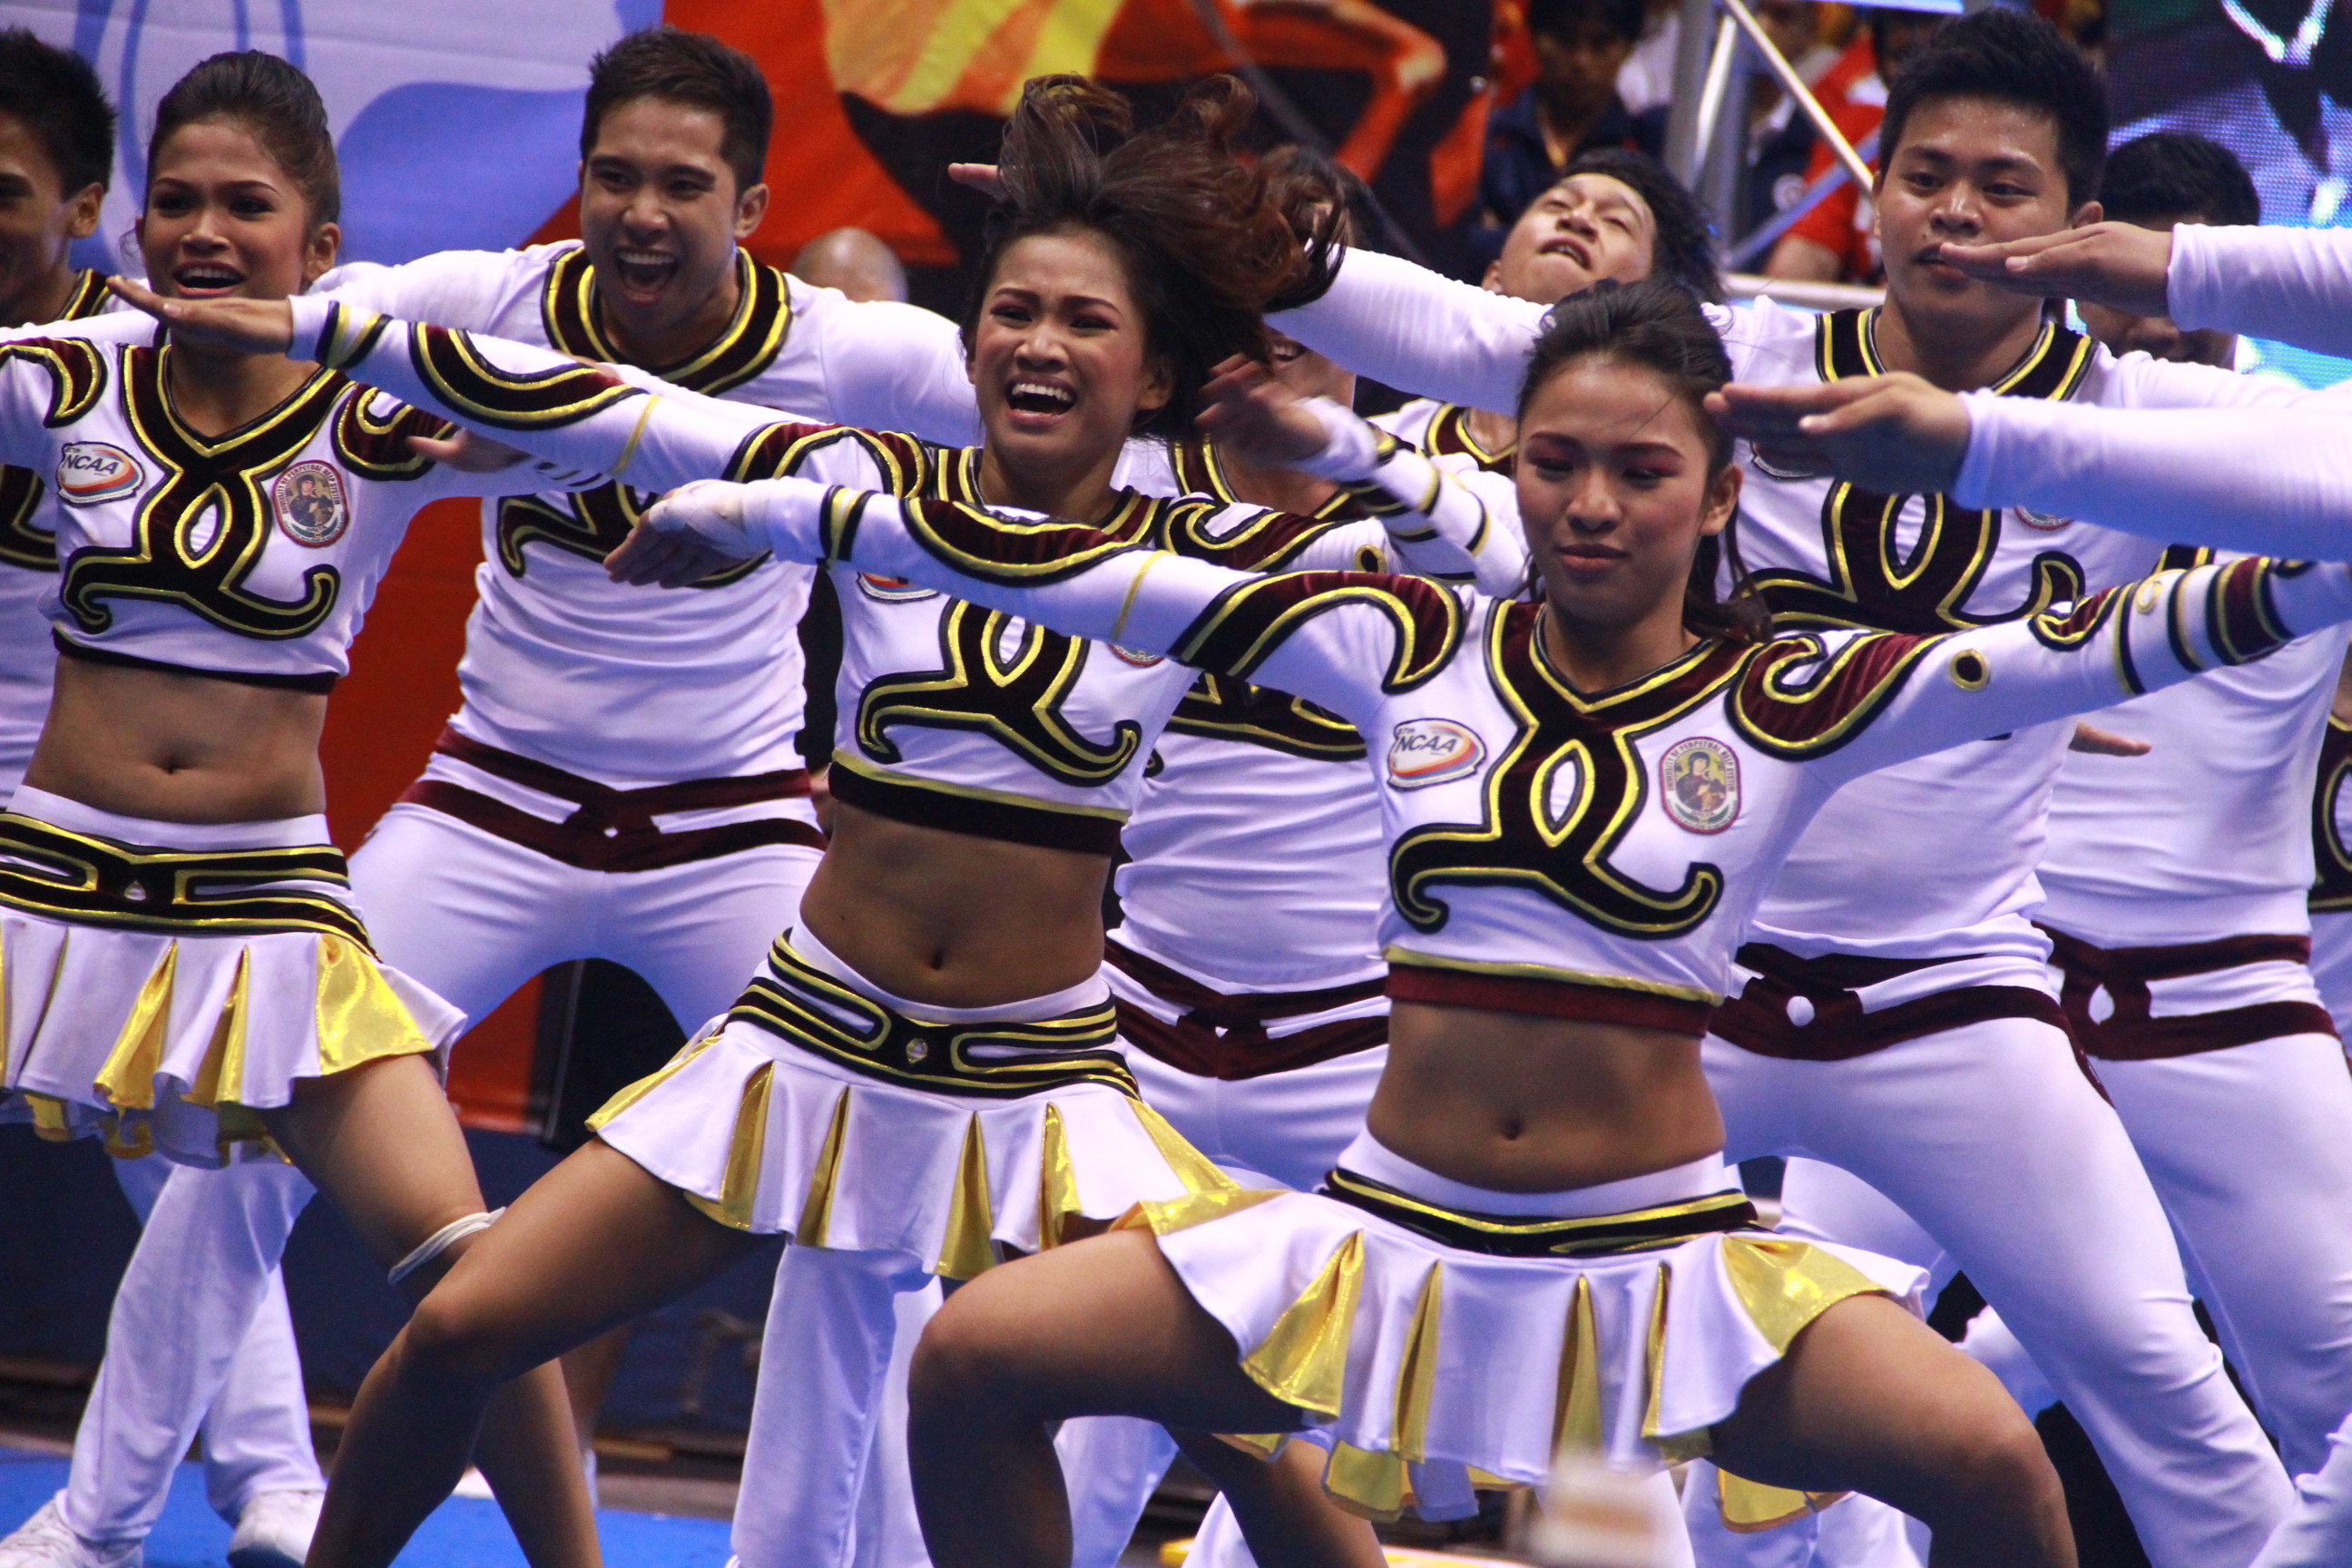 CHEER DANCE CHAMPIONS. University of Perpetual Help took home the title in the 87th NCAA Cheer Dance Competition. Josh Albelda. 